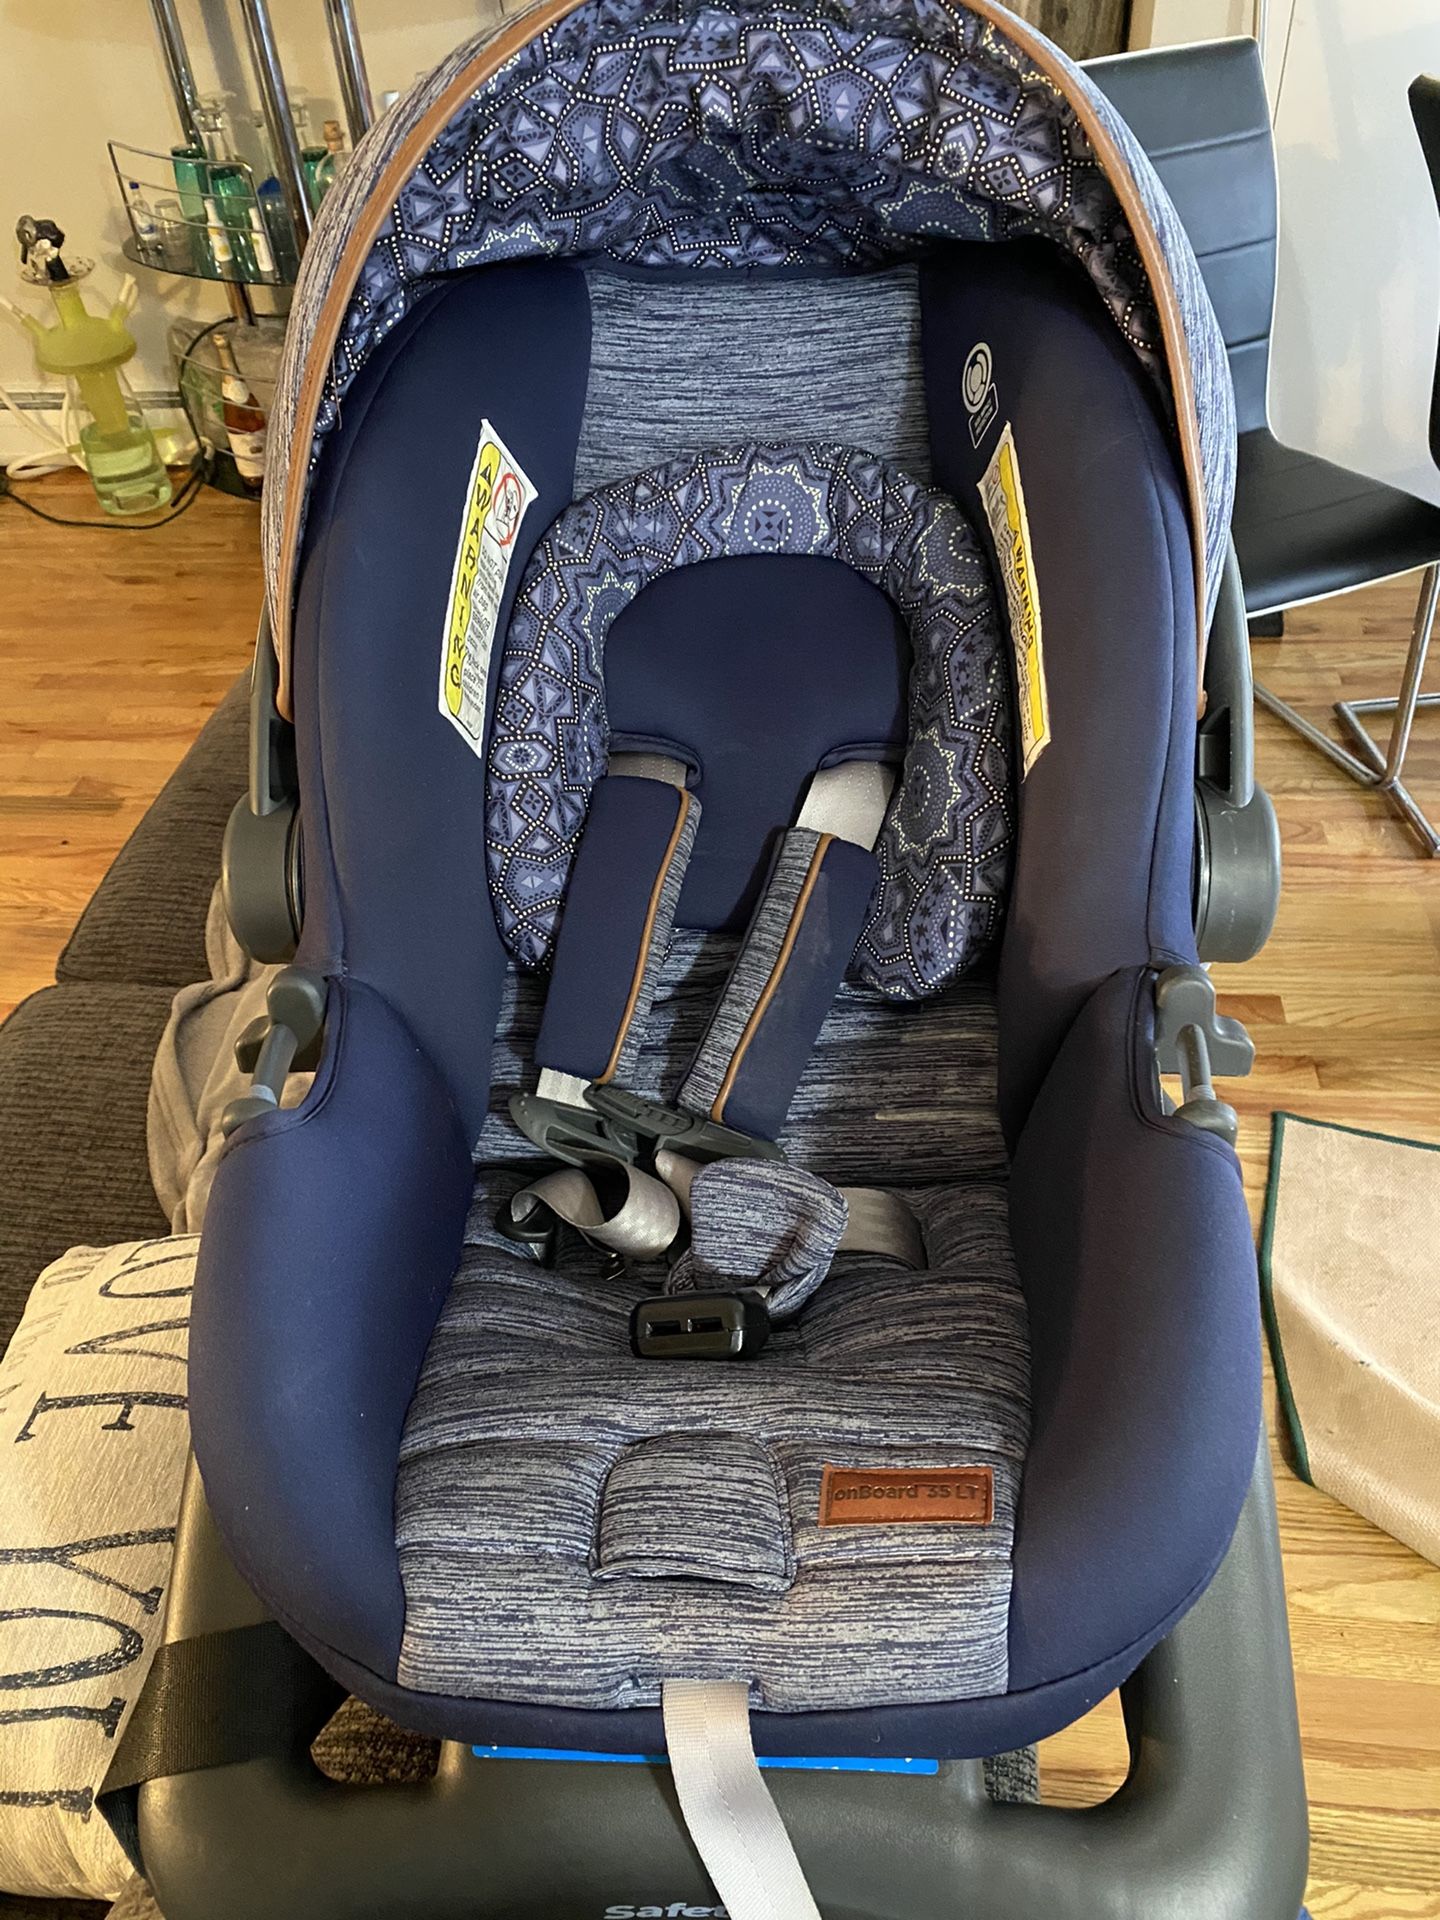 Monbebe Dash All in One Travel System with Memory Foam, Boho